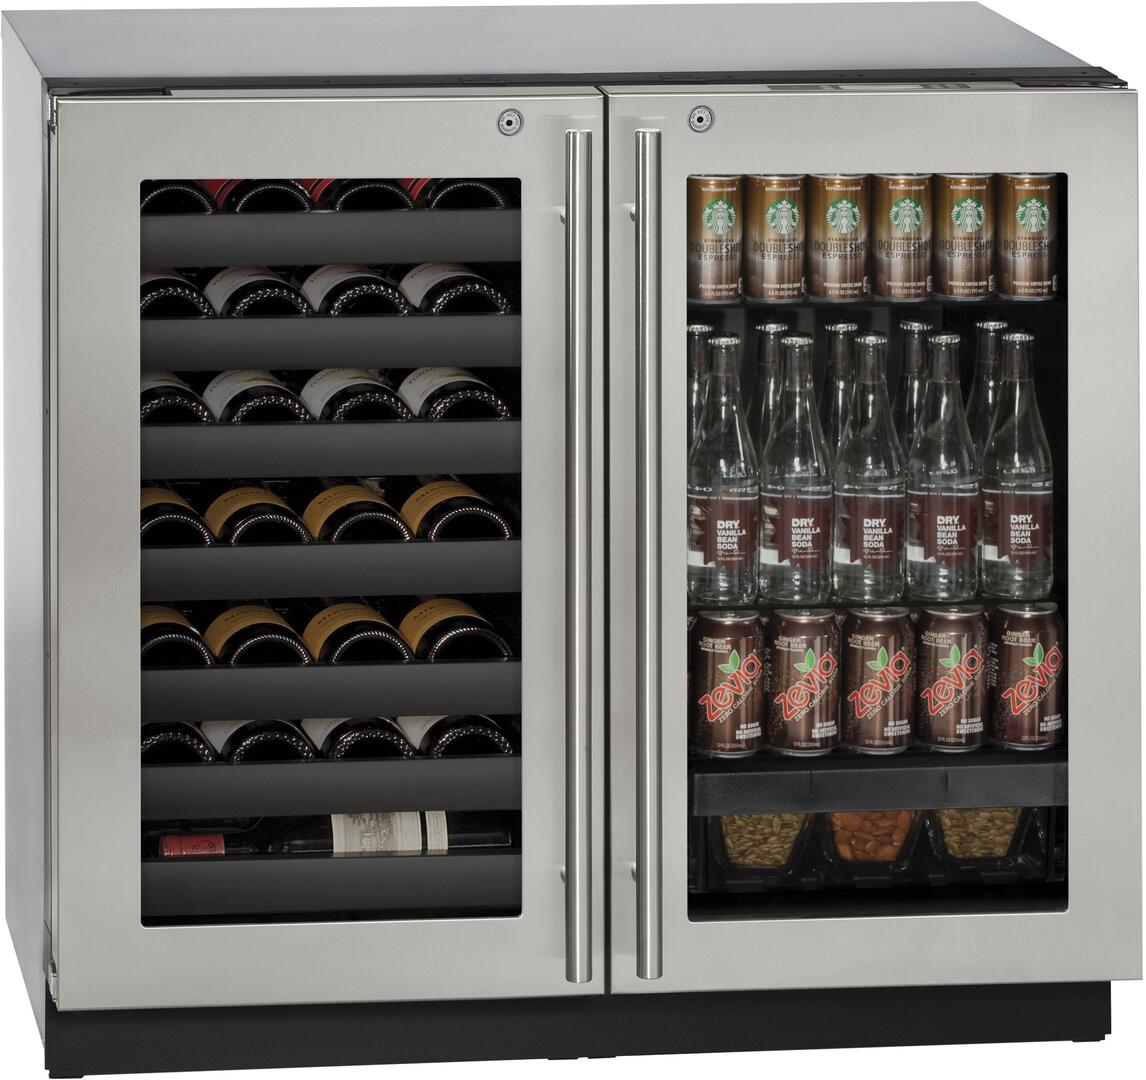 Main Image, U-3036BVWCS-13B 36&quot; Modular 3000 Series Beverage Center with Lock, U-Select Control, Dual Temperature Zones, 7 Wine Racks, 31 Wine Bottle Capacity and Triple Thermopane Glass Door in Stainless Steel